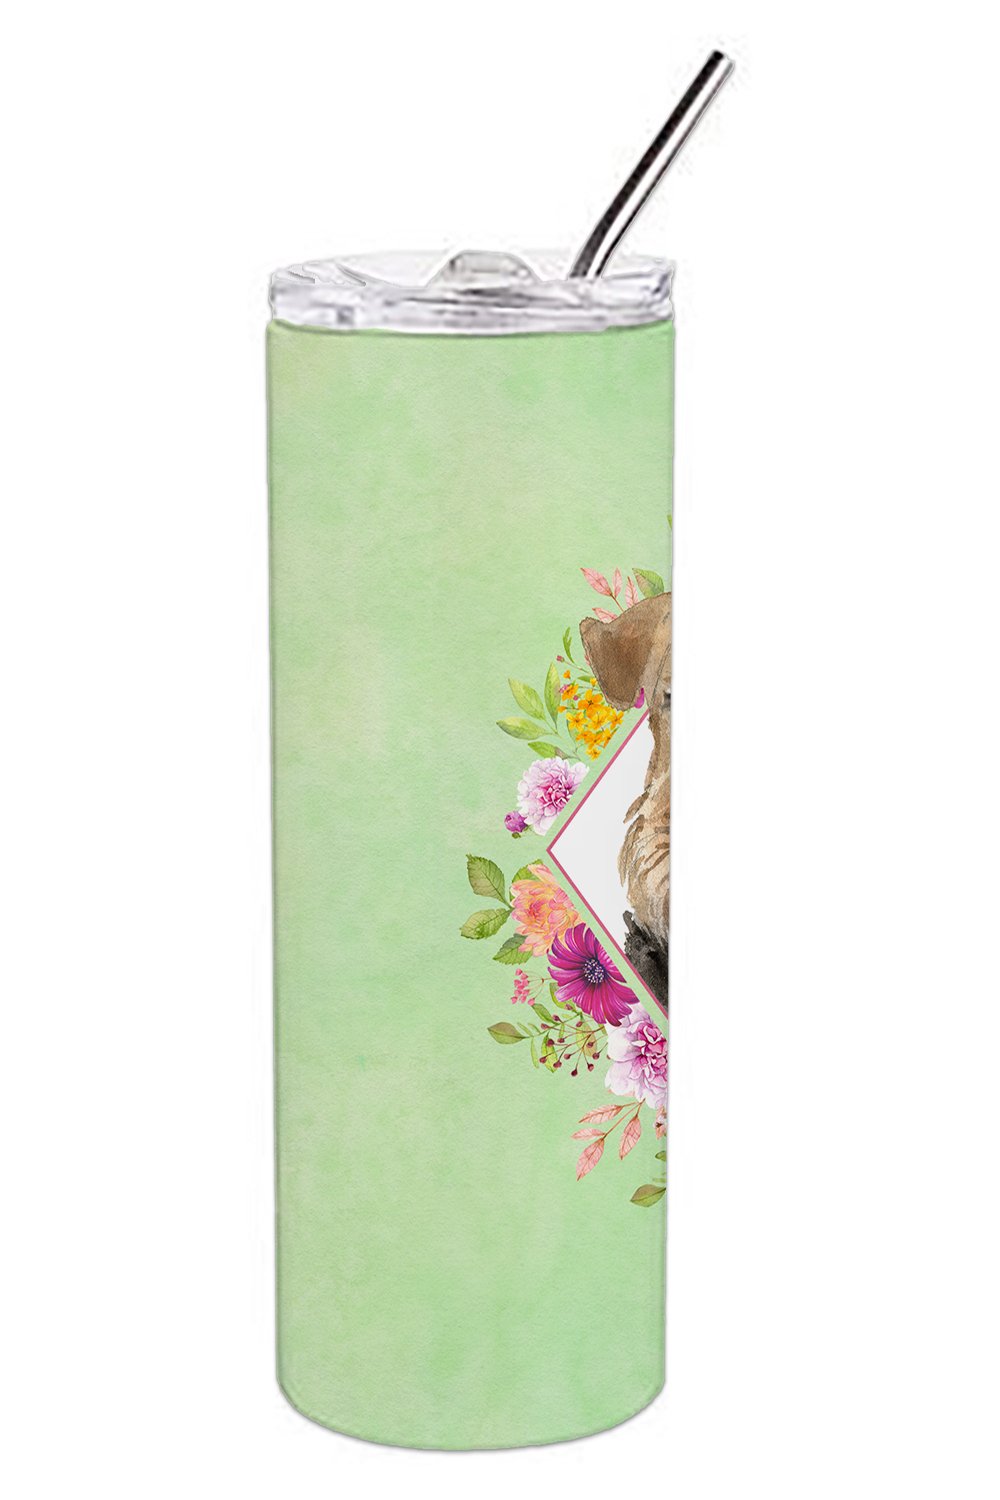 Airedale Terrier Green Flowers Double Walled Stainless Steel 20 oz Skinny Tumbler CK4364TBL20 by Caroline's Treasures